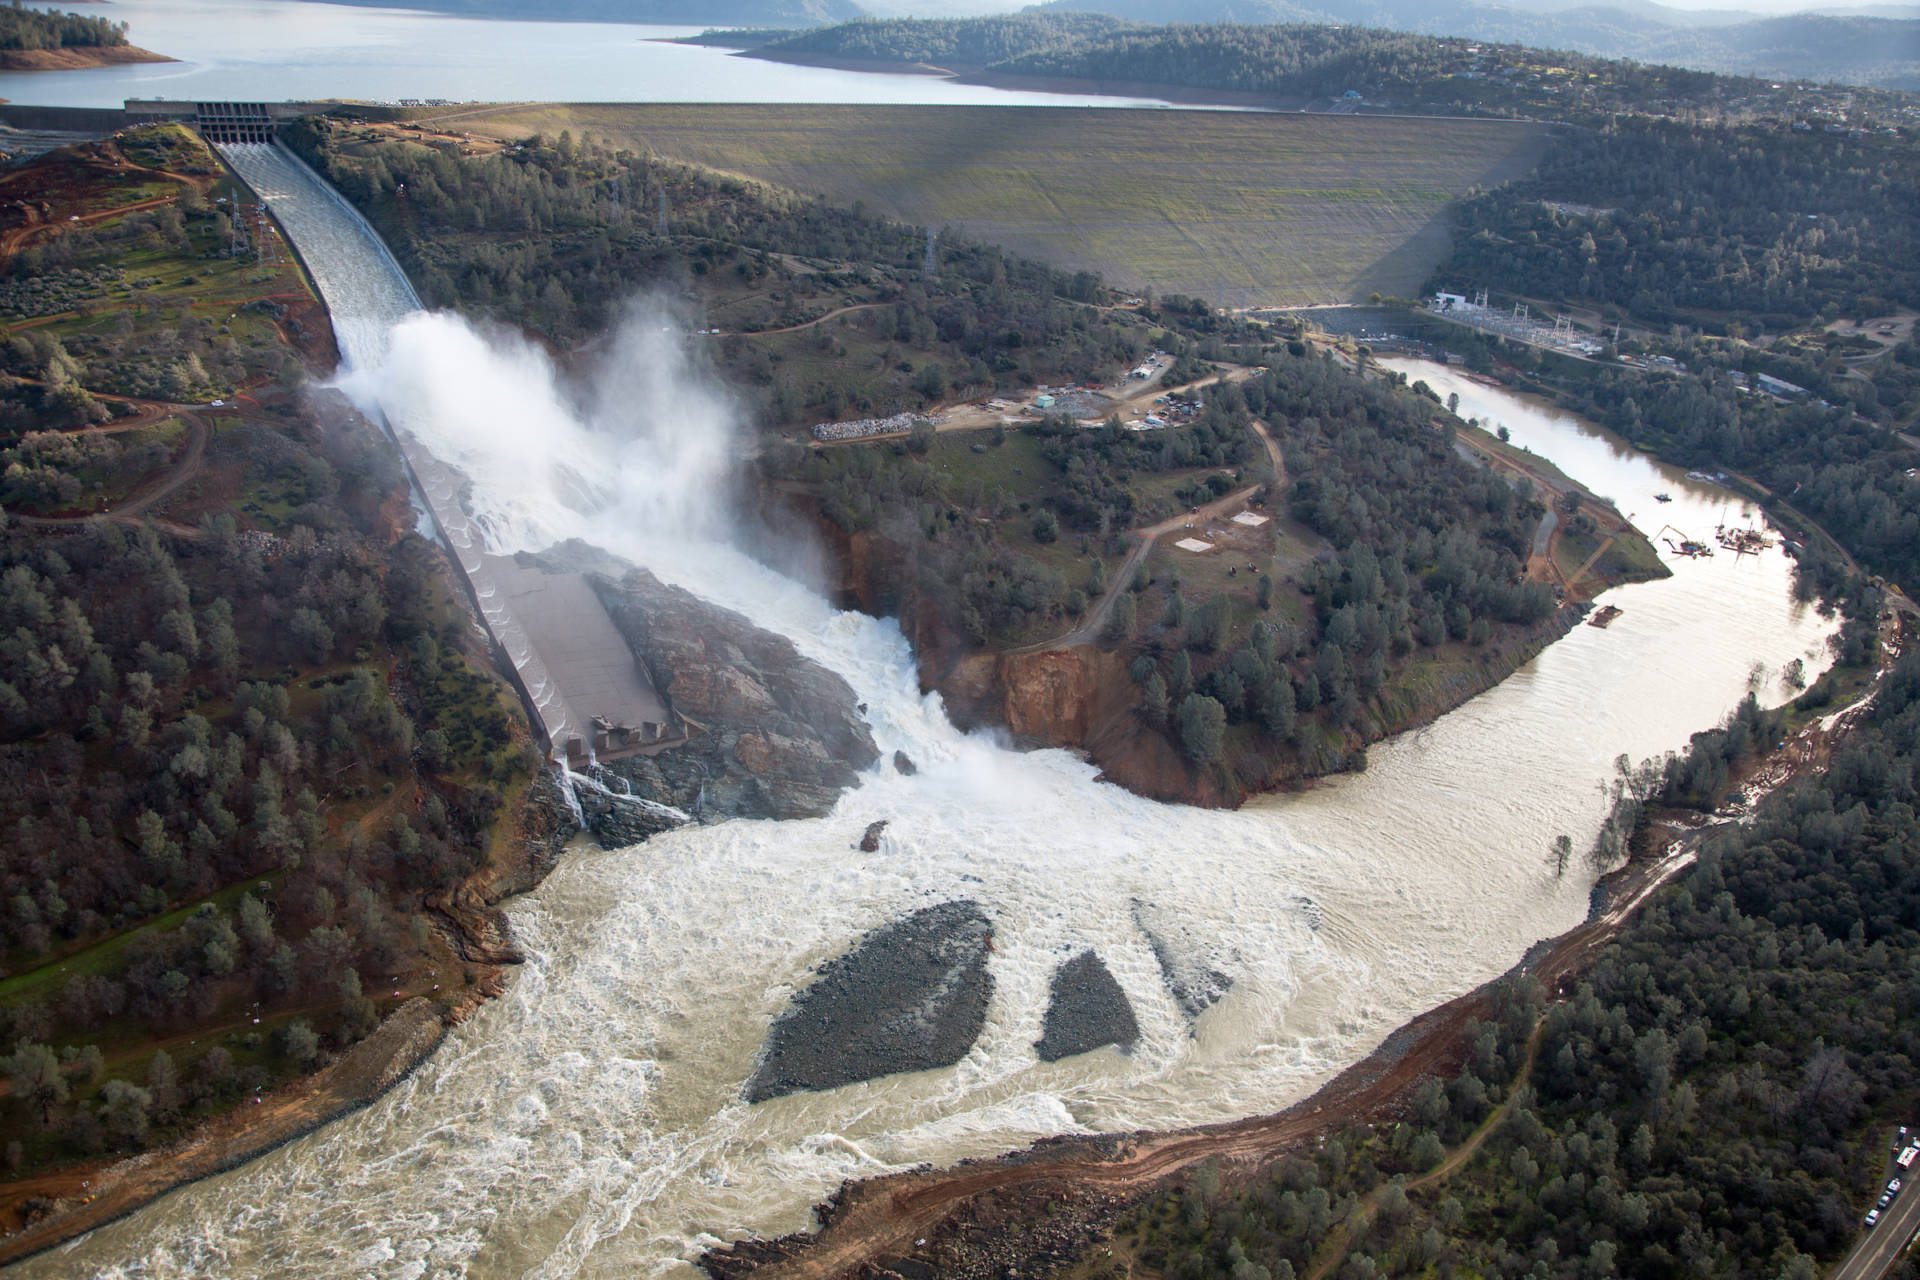 Oroville Suit Alleges DWR Corruption, Recklessness Led to Spillway Crisis